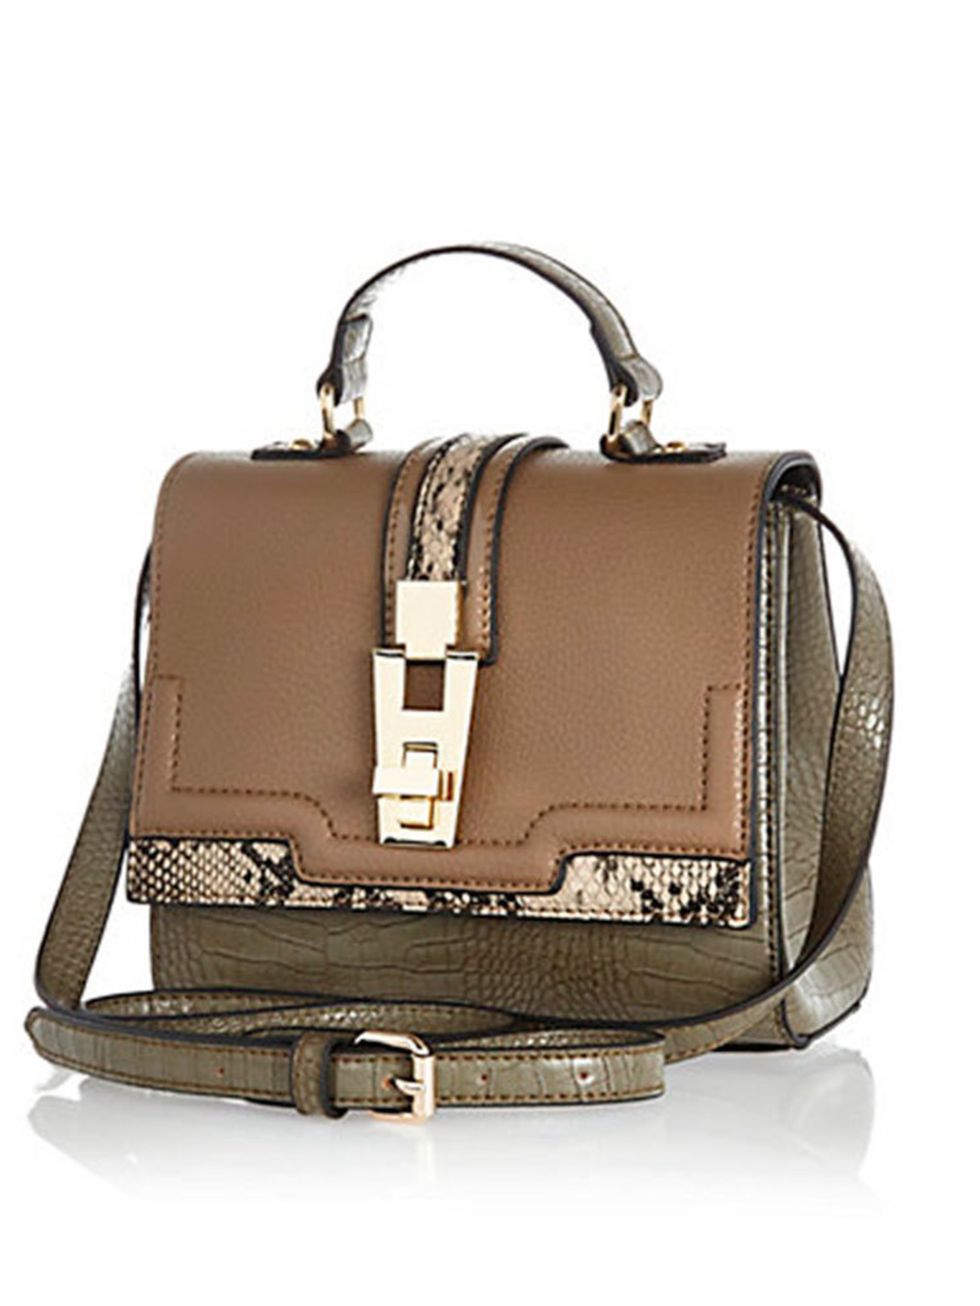 <p>Khaki green and animal print. Two trends in one. </p>

<p> </p>

<p><a href="http://www.riverisland.com/women/bags--purses/shoulder-bags/Khaki-colour-block-structured-cross-body-bag-658938" target="_blank">River Island</a> bag,  £30</p>